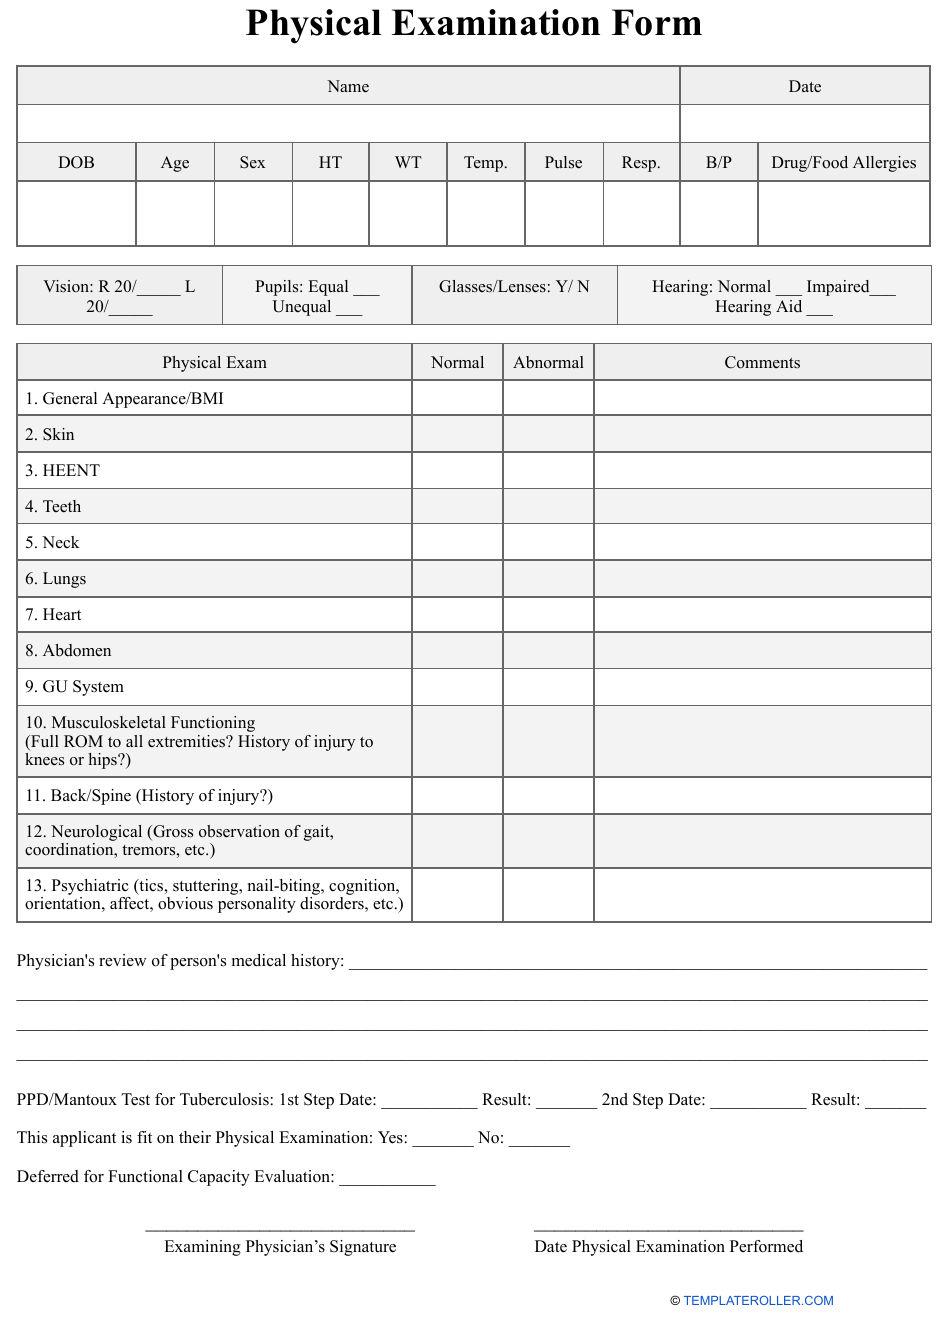 Physical Examination Form - Table, Page 1